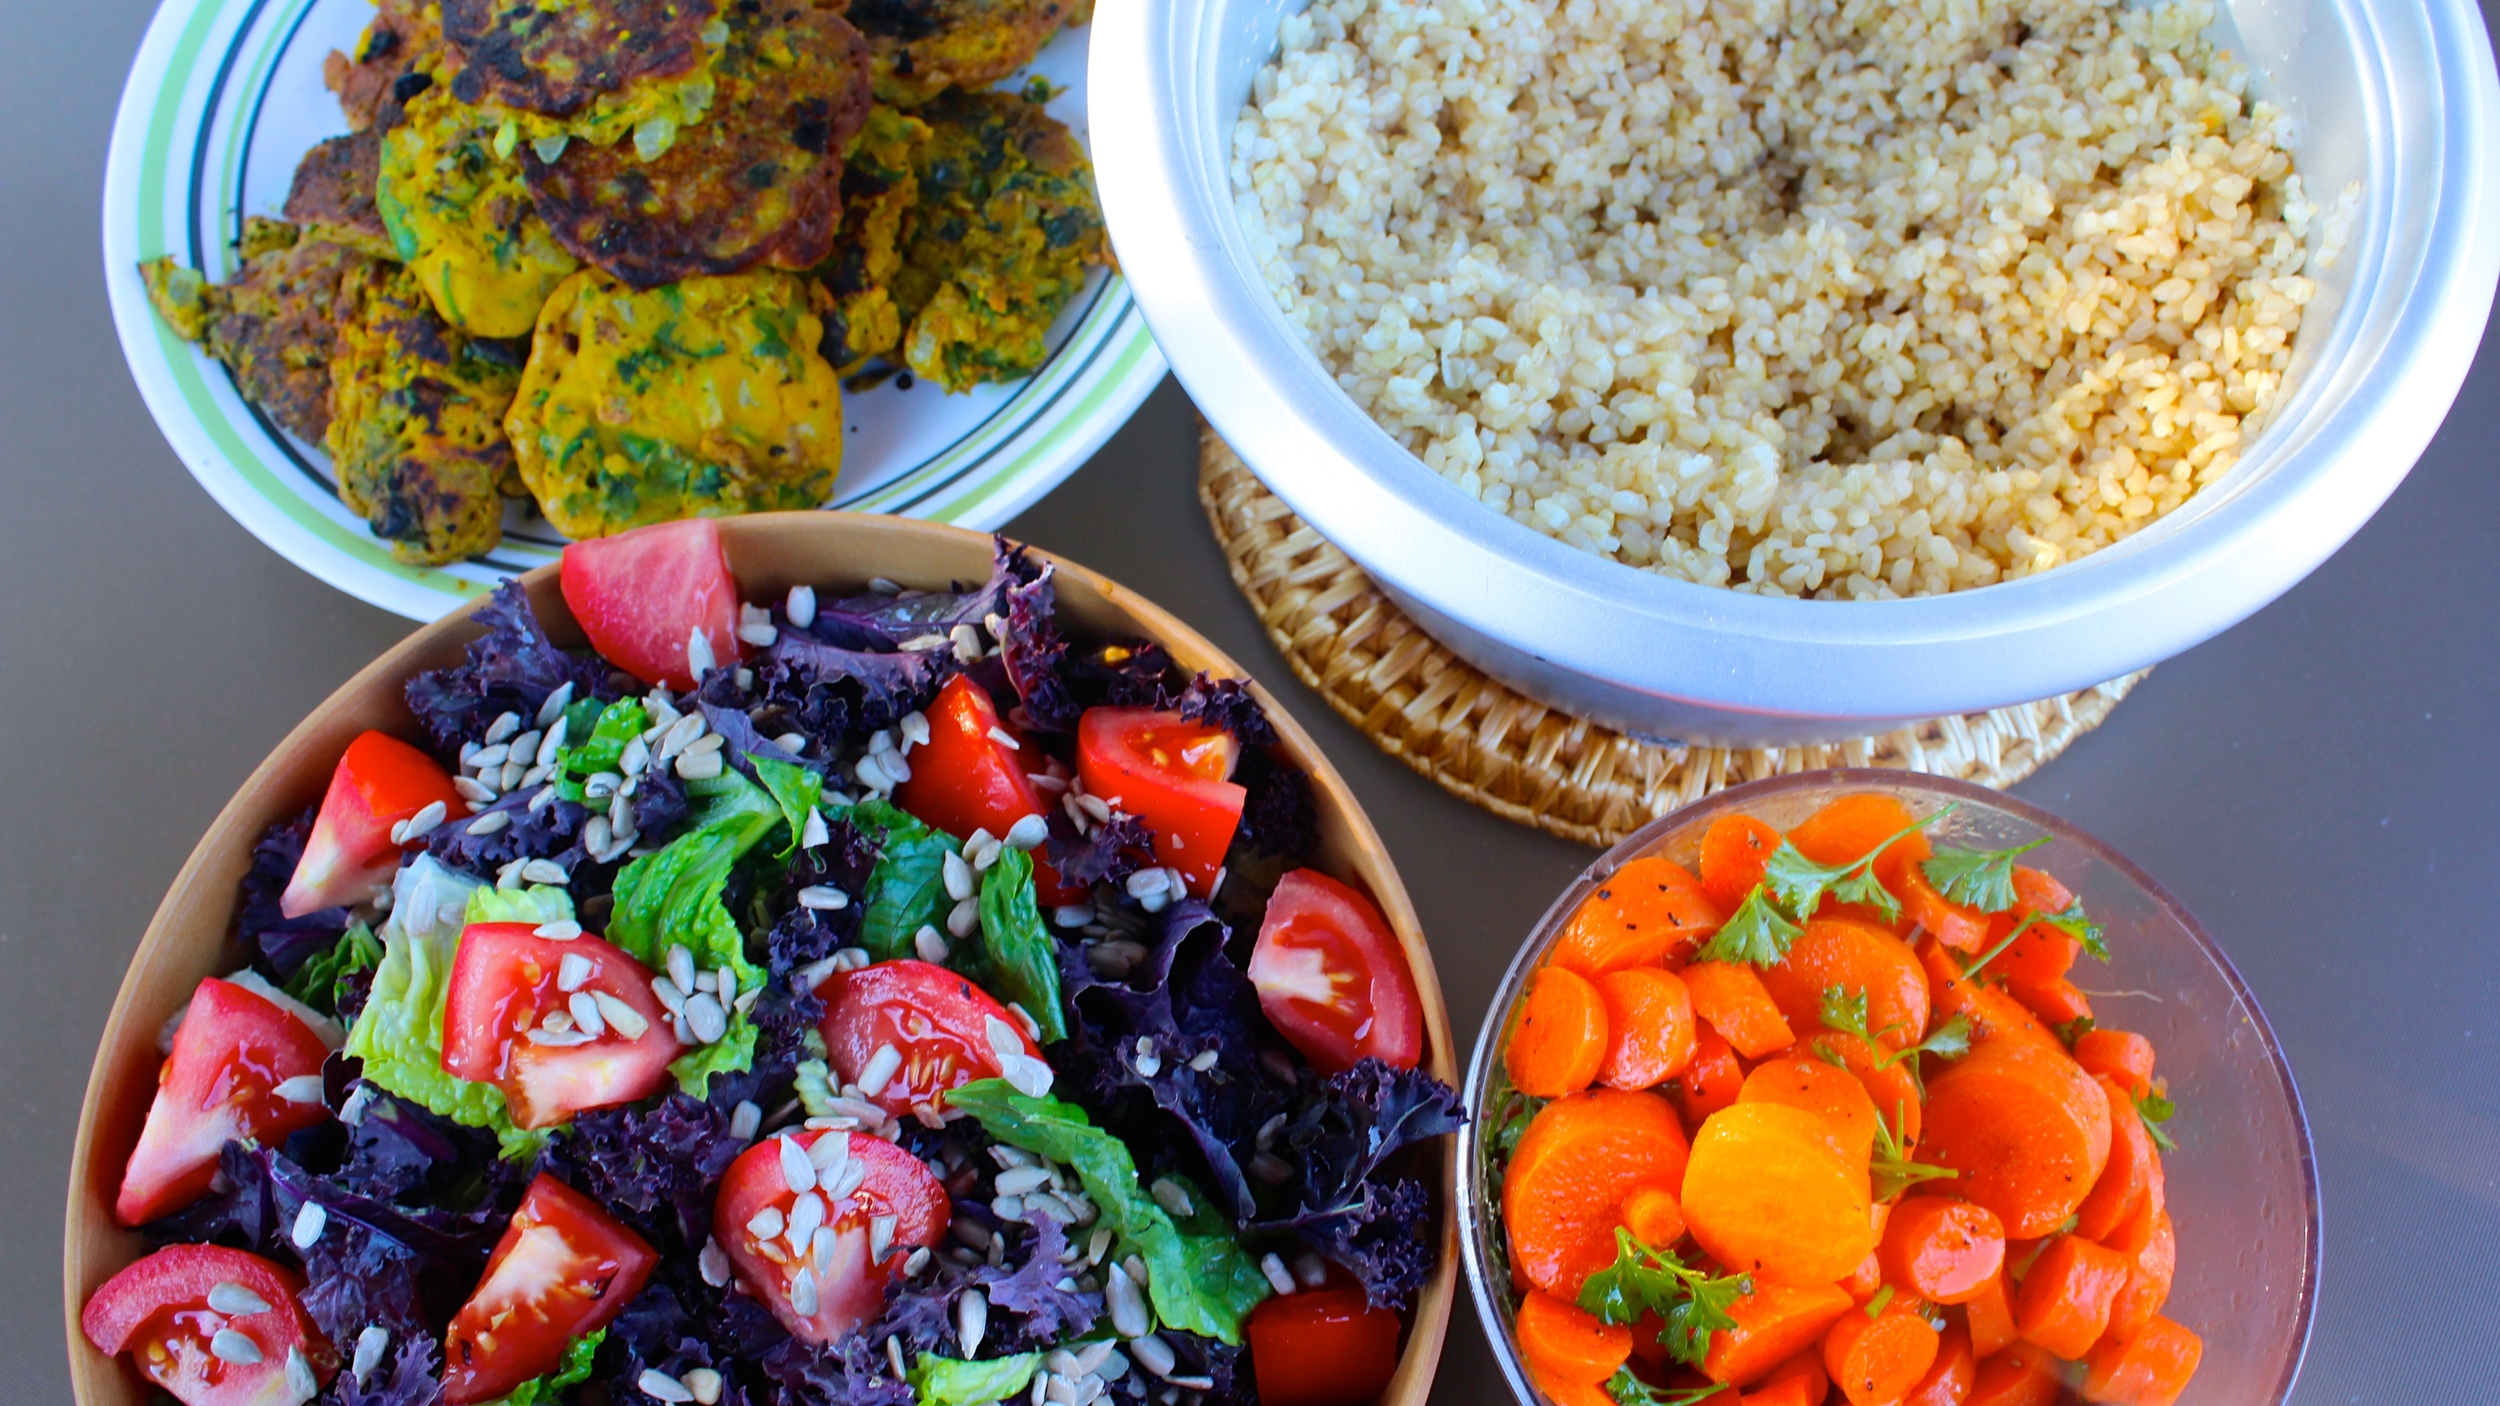 Chickpea patties, brown rice, and salads